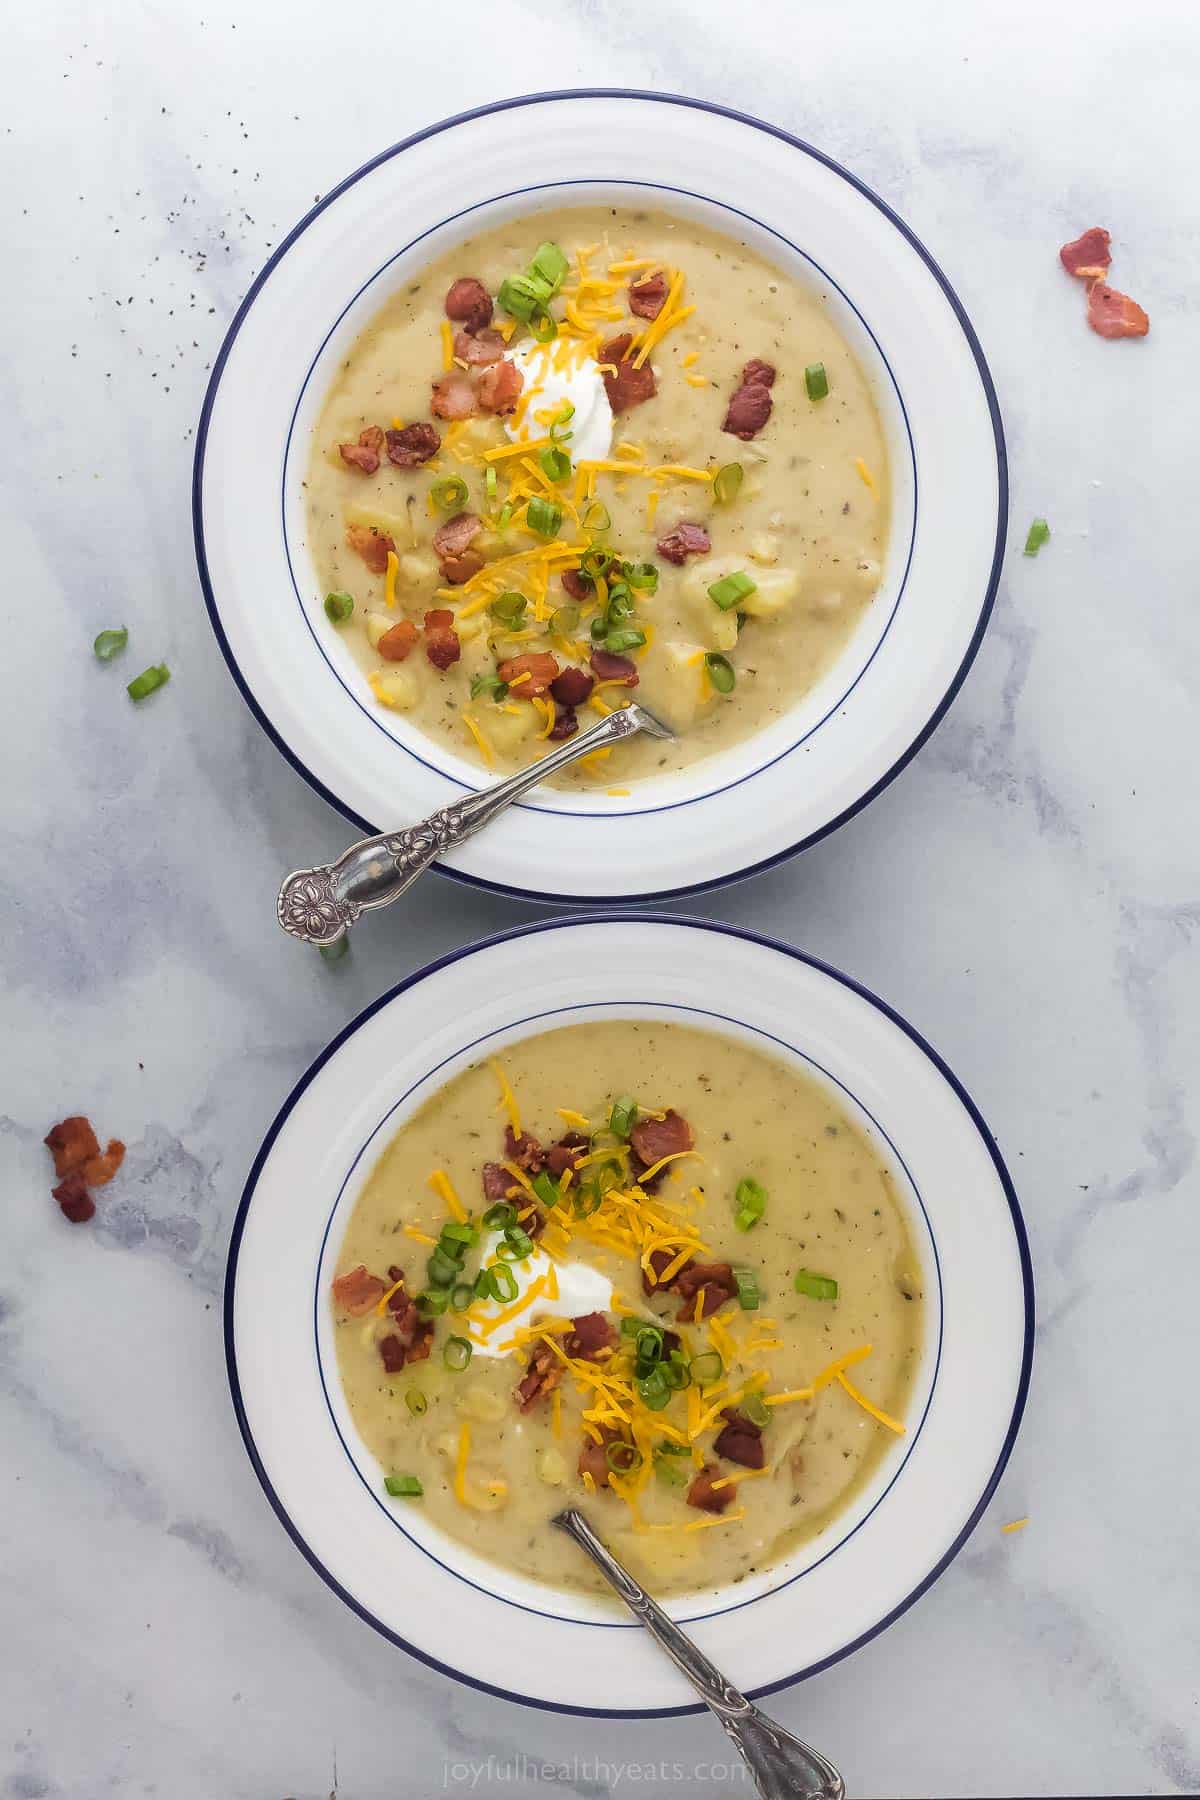 two bowls of a bowl of creamy ،ato soup with bacon and cheese garnish